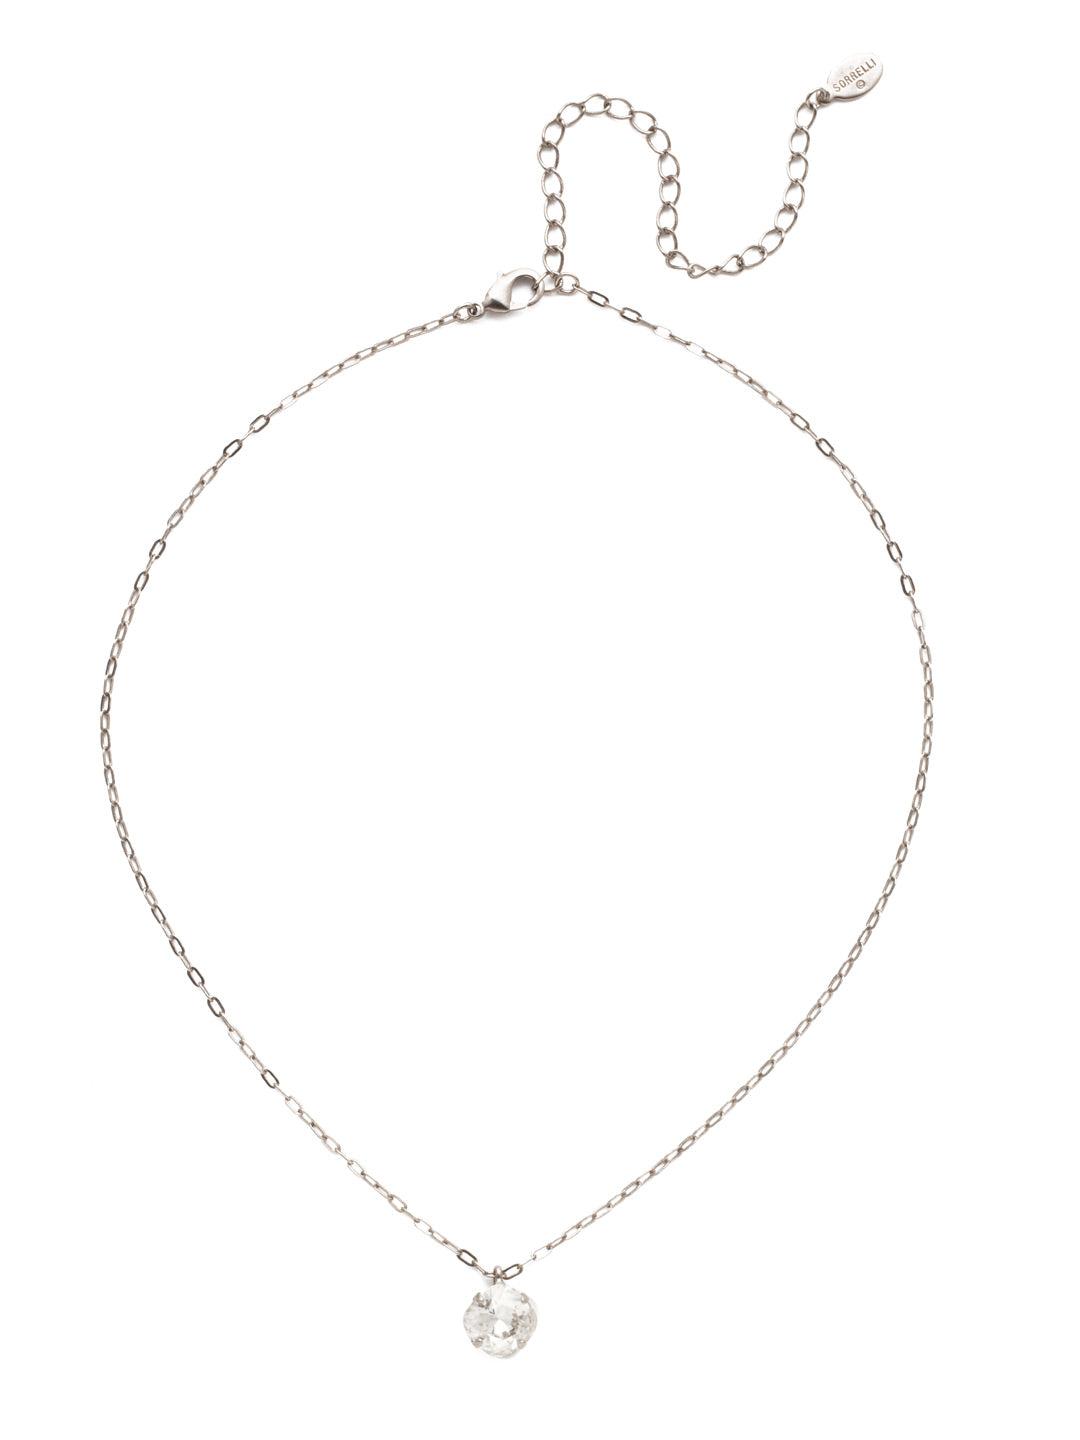 Siren Pendant Necklace - NEP22ASCRY - <p>With a cushion-cut crystal and delicate chain, the Siren Pendant  will add a litle sparkle to your everyday look. From Sorrelli's Crystal collection in our Antique Silver-tone finish.</p>